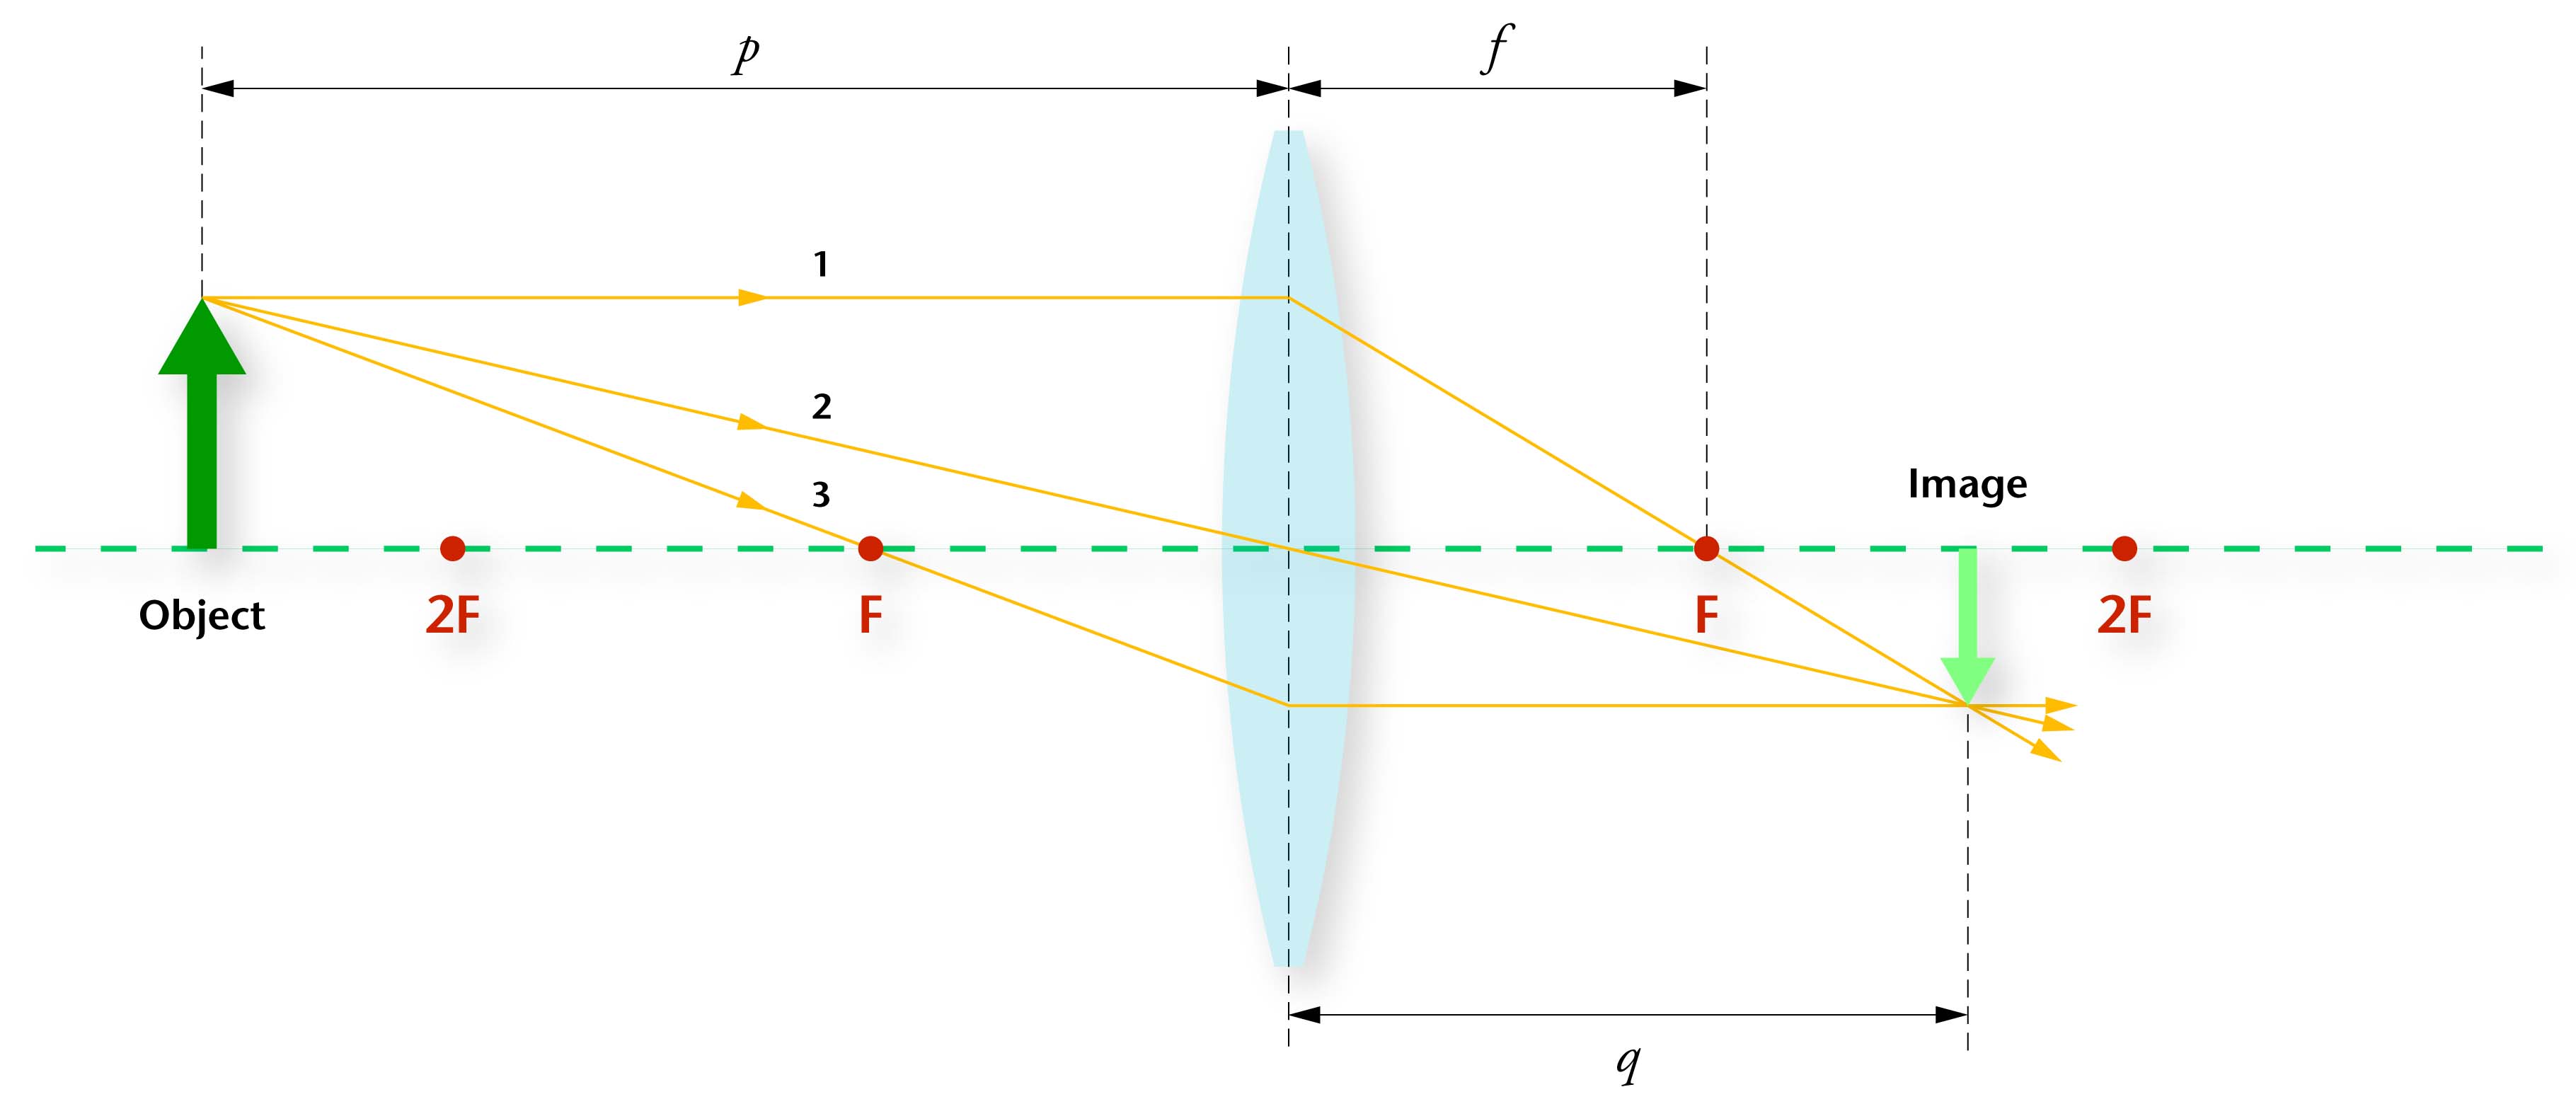 25 Ray Diagram For Converging Lenses